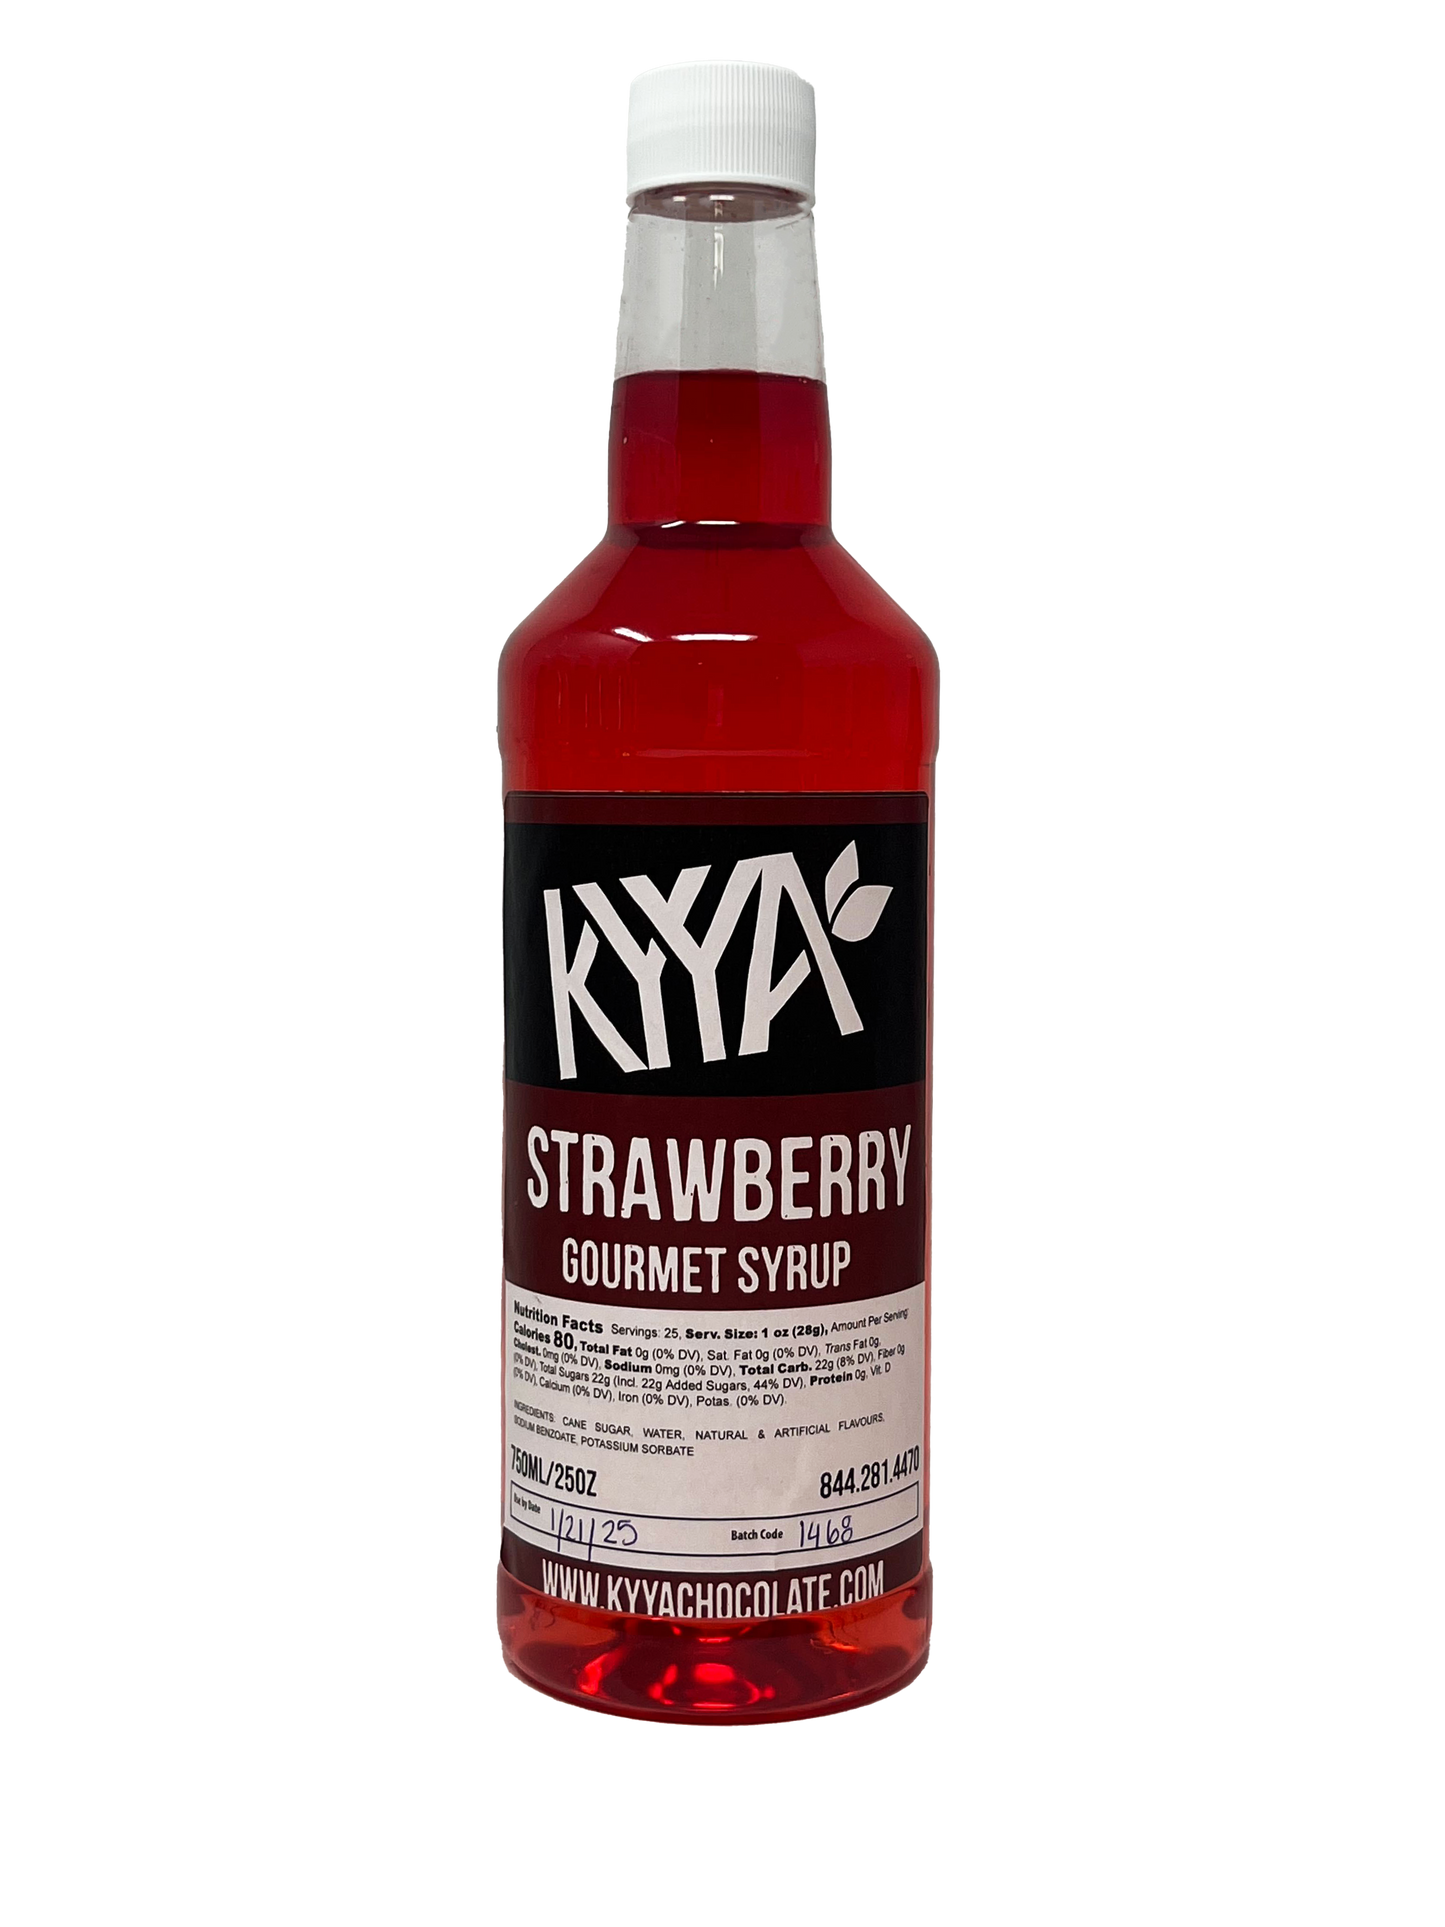 Strawberry Gourmet Syrup